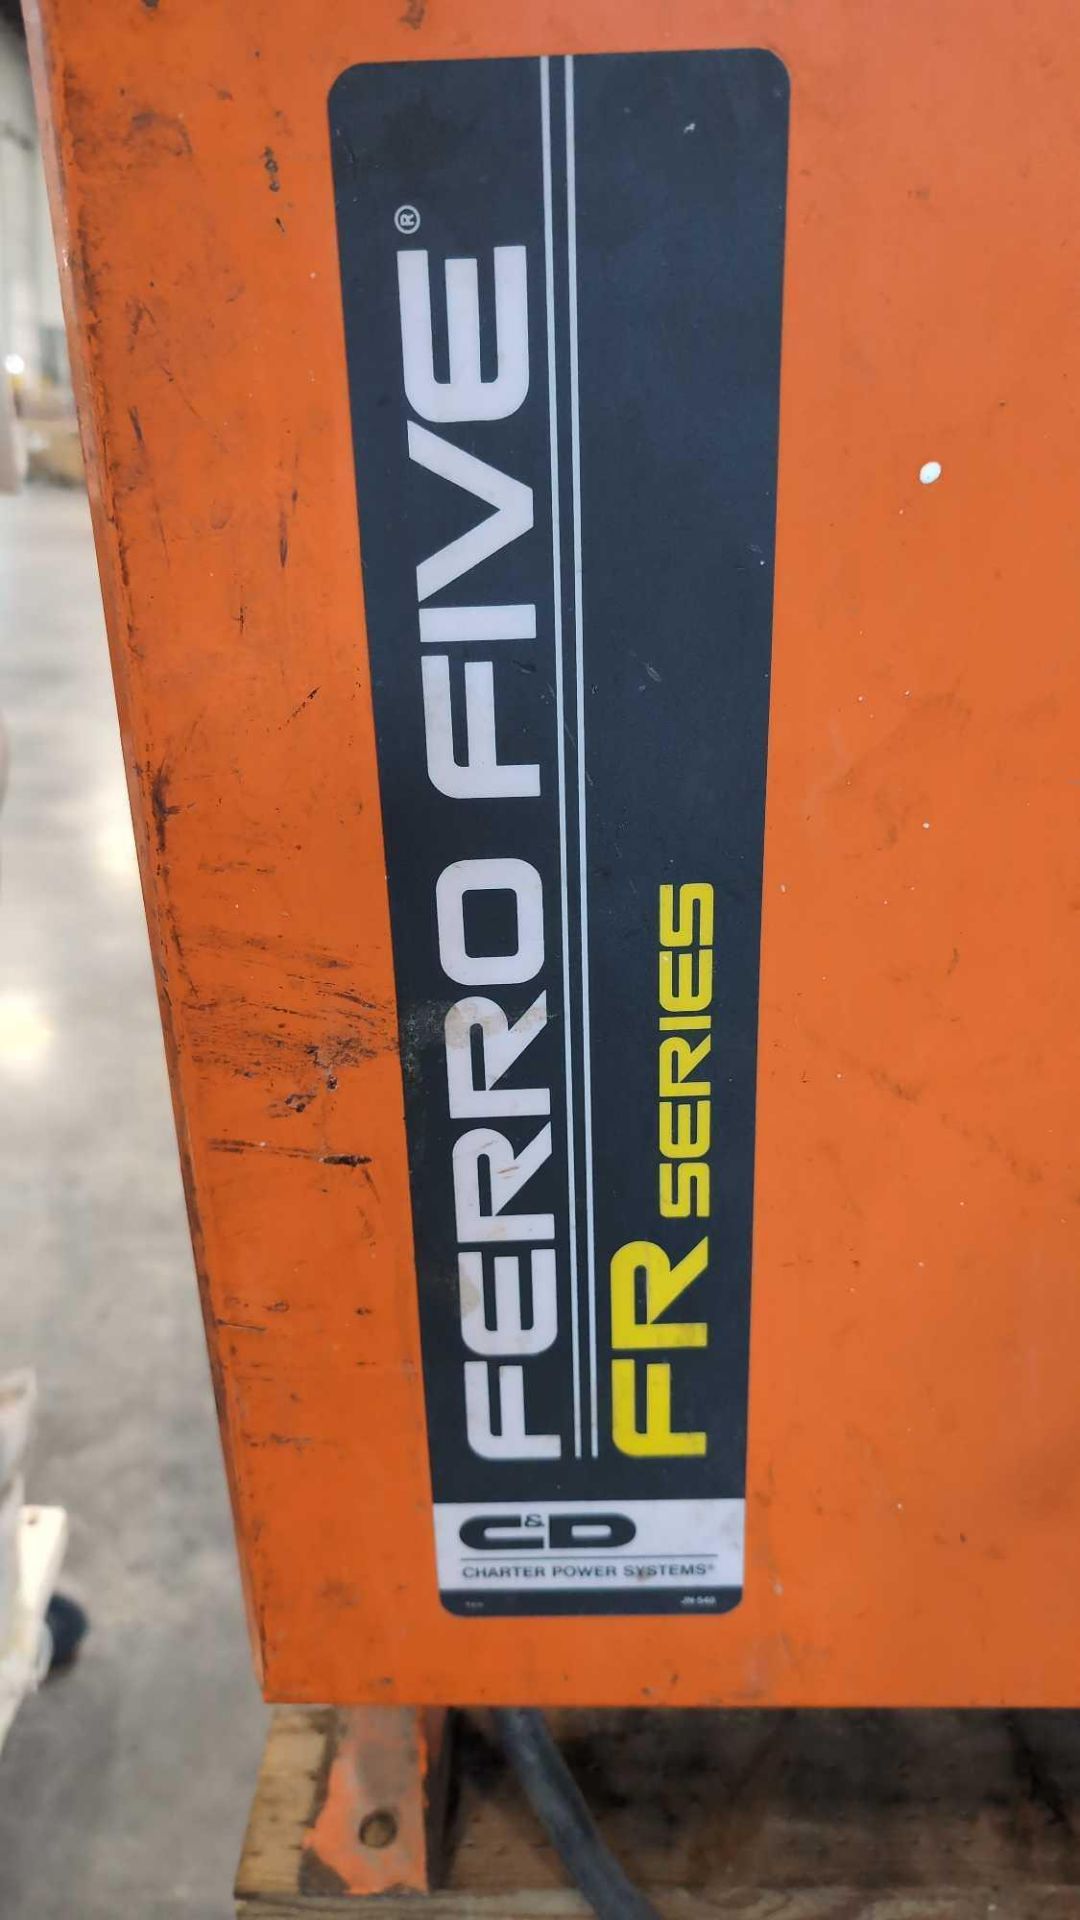 Ferro Five DR Series power systems Industrial battery/charger - Image 2 of 5